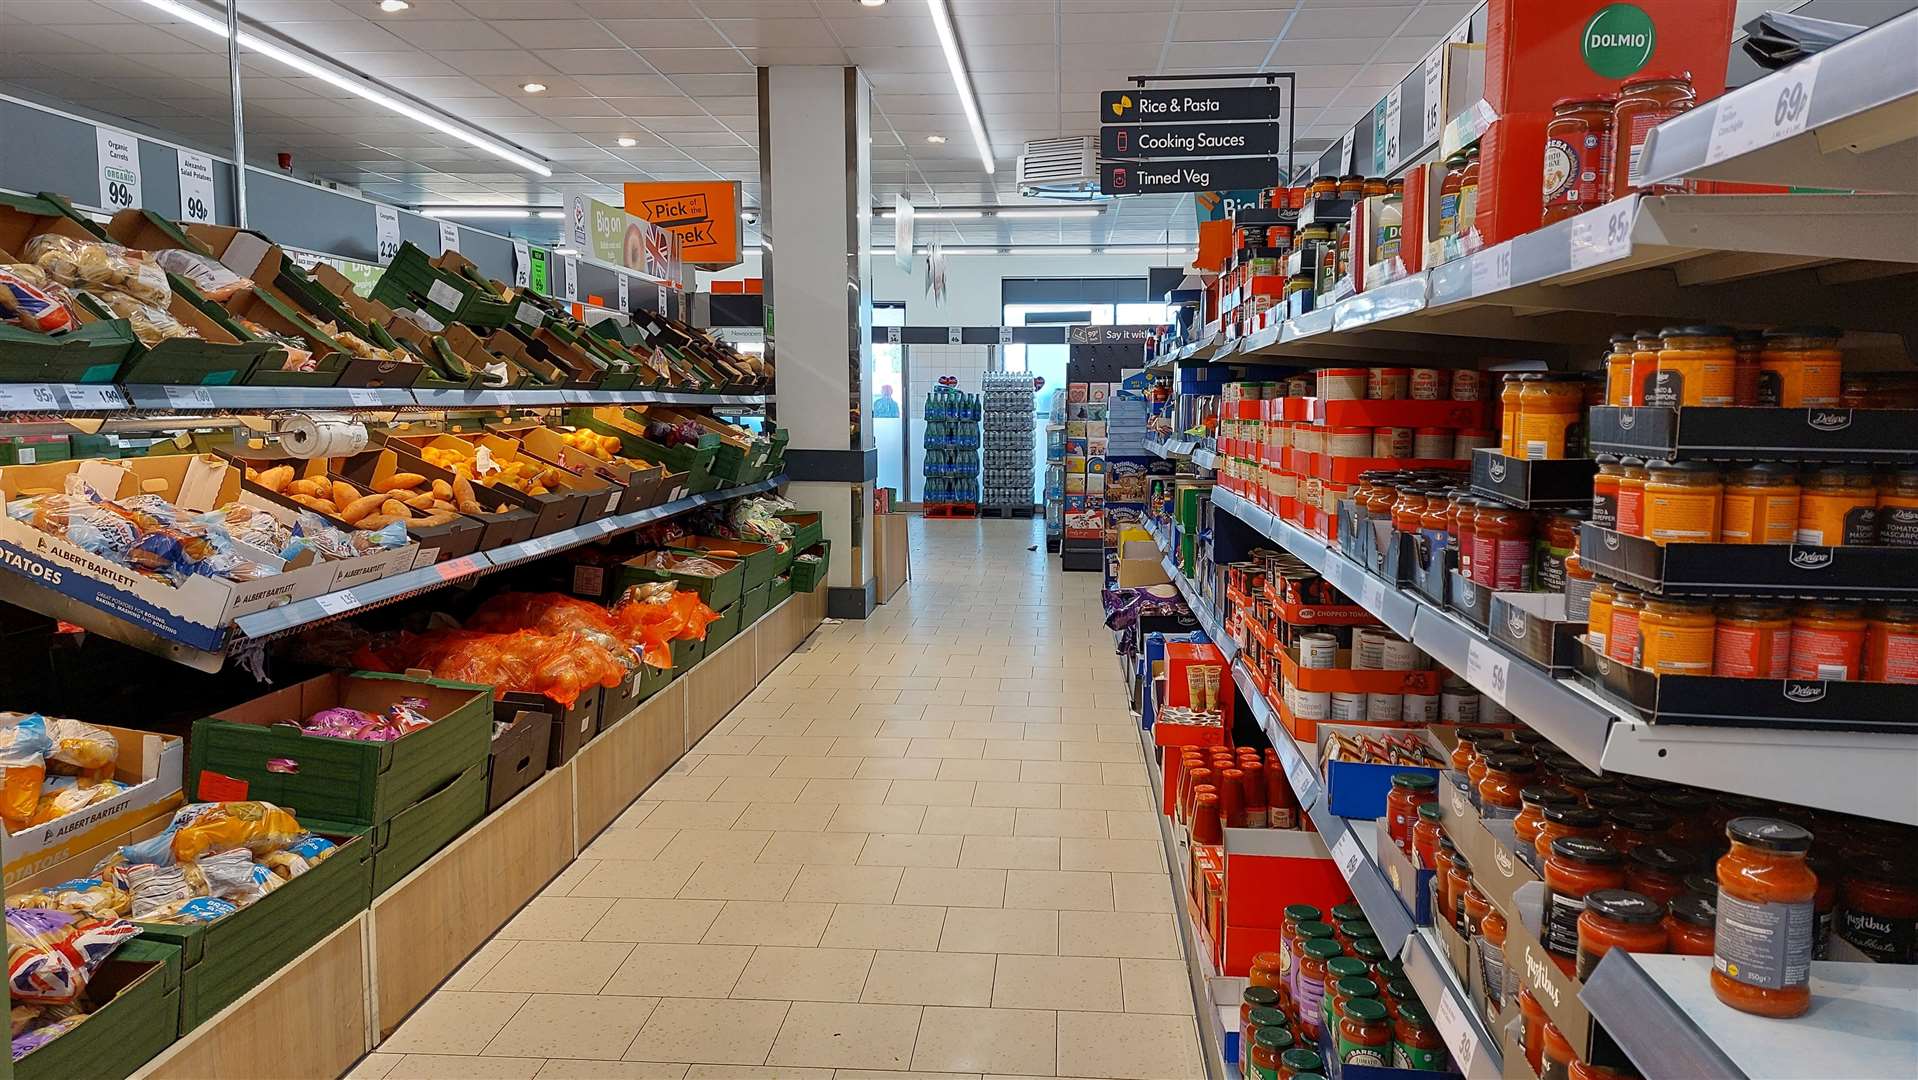 The aisles have been criticised for being narrow